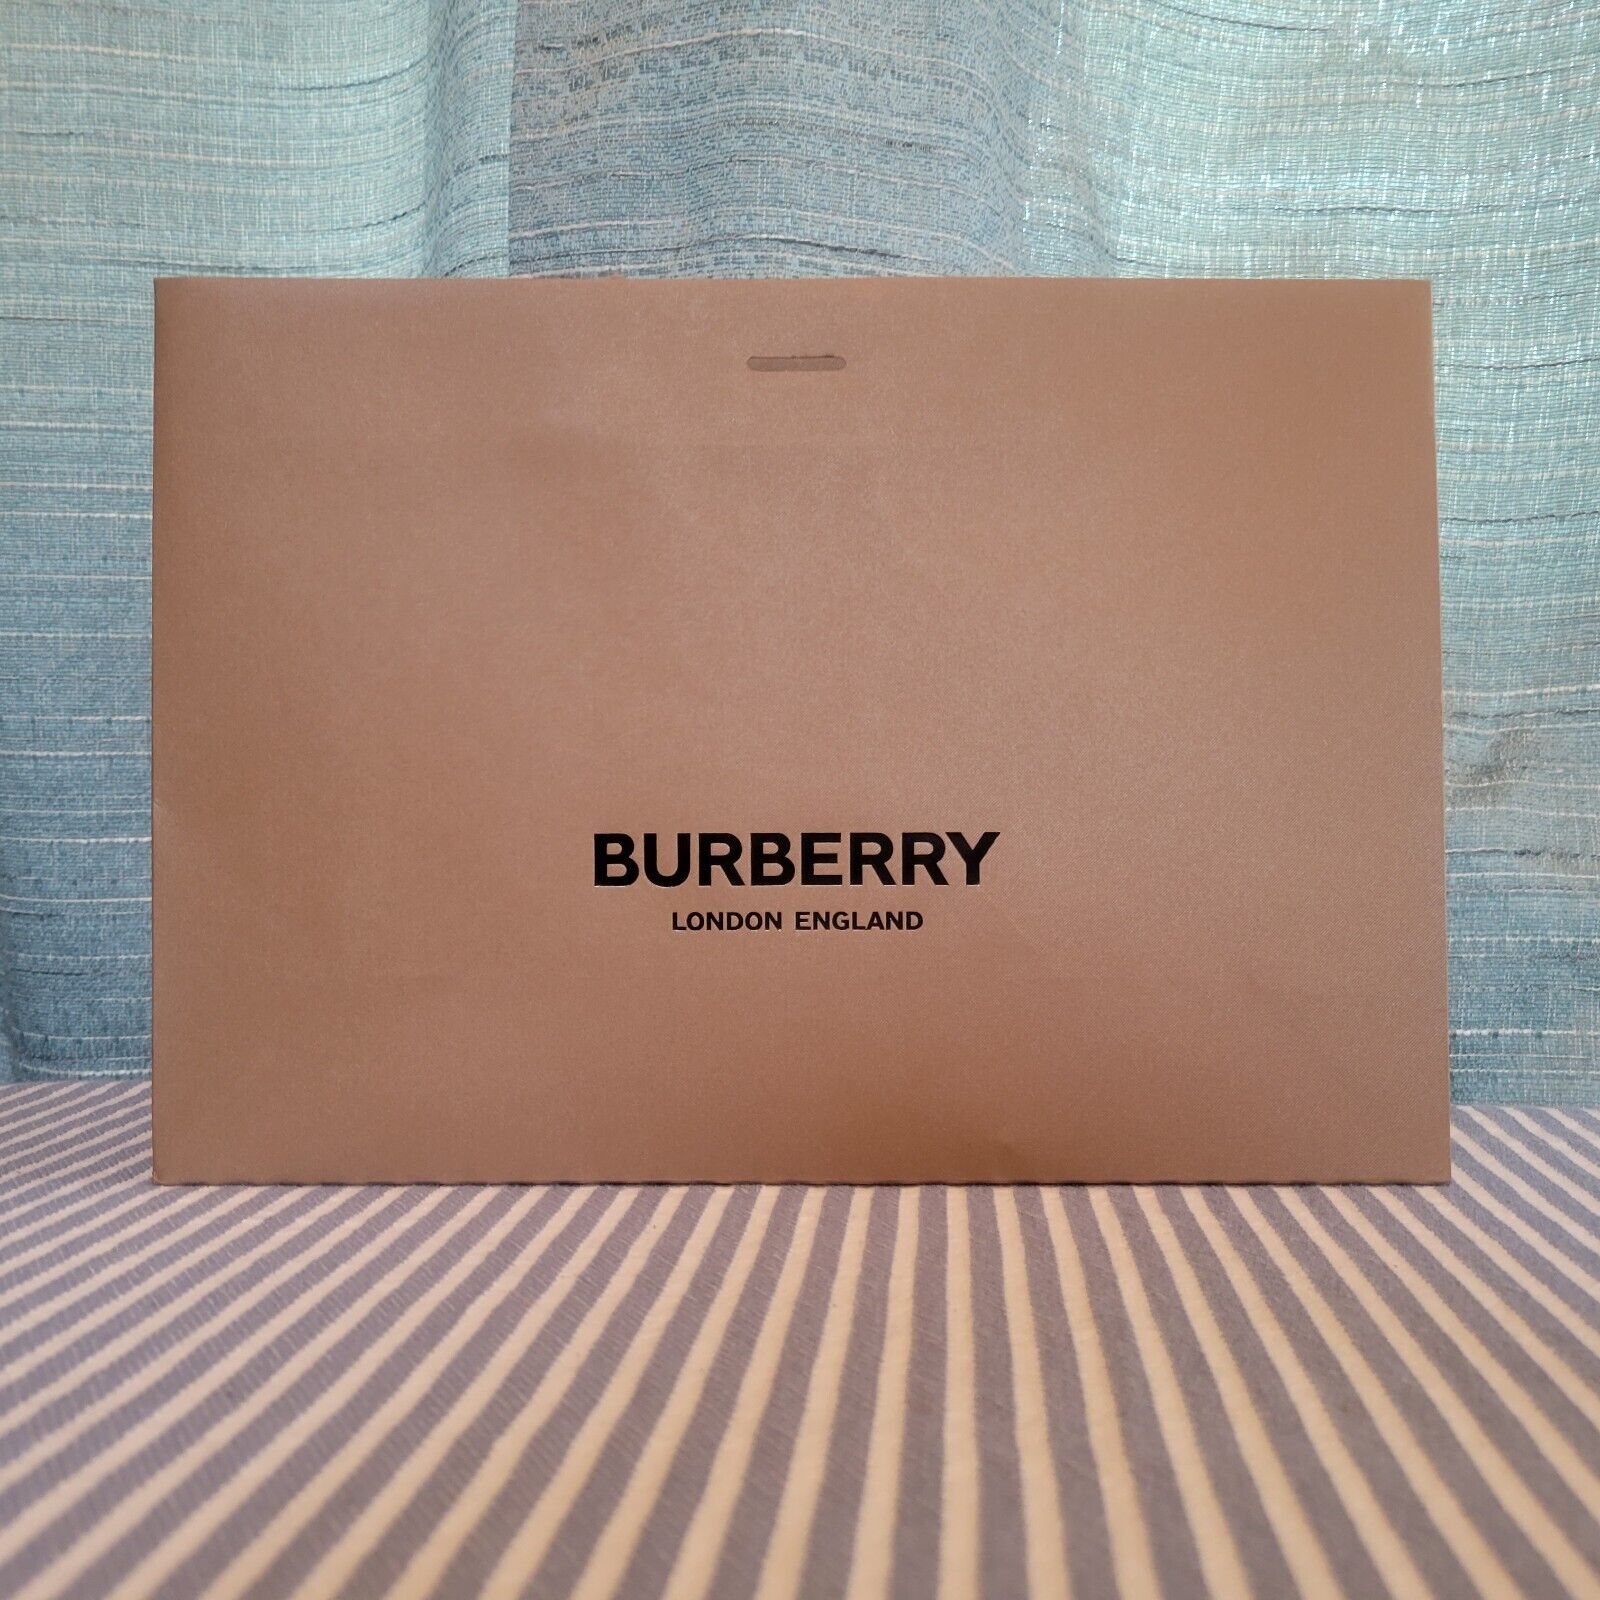 Burberry - Set of 3 Brown Medium Long Strap Handle Shopping Bags - New